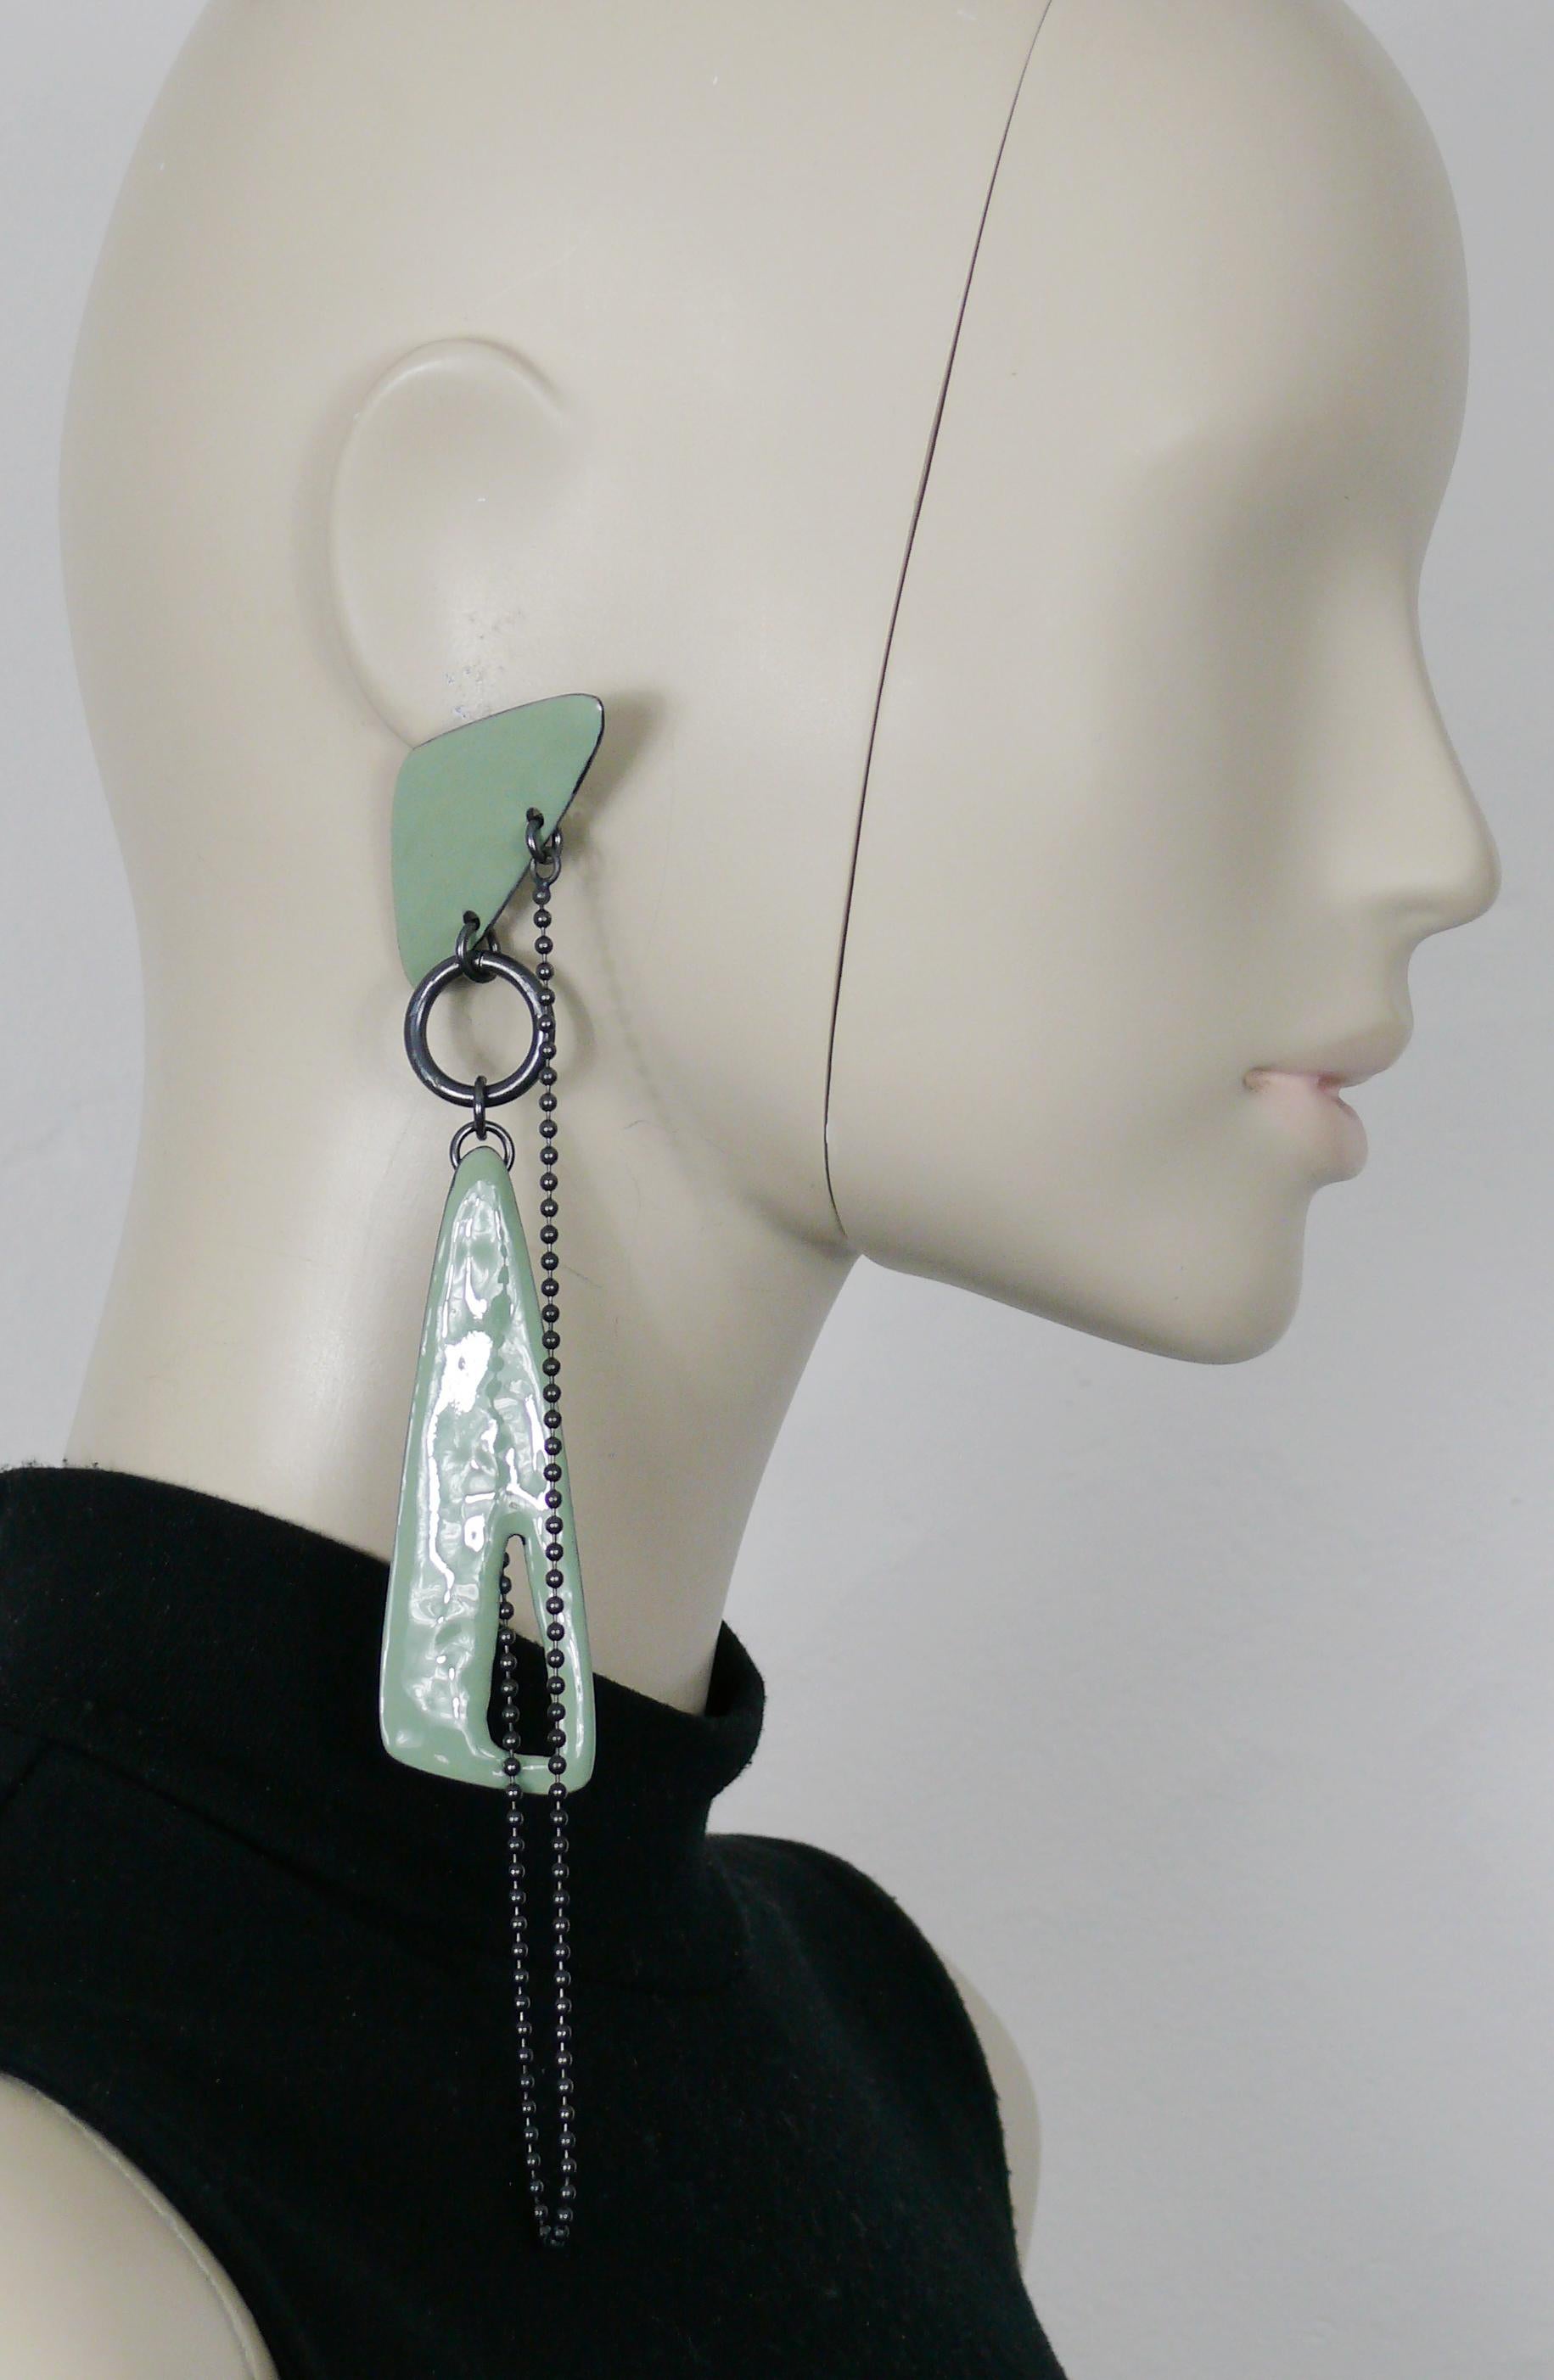 JEAN PAUL GAULTIER hanging mobile dangling earrings (clip-on) featuring free form green enamel elements, a gun patina ball chain and rings.

Marked GAULTIER (only on one earring).

Indicative measurements : max. height approx. 19 cm (7.48 inches) /